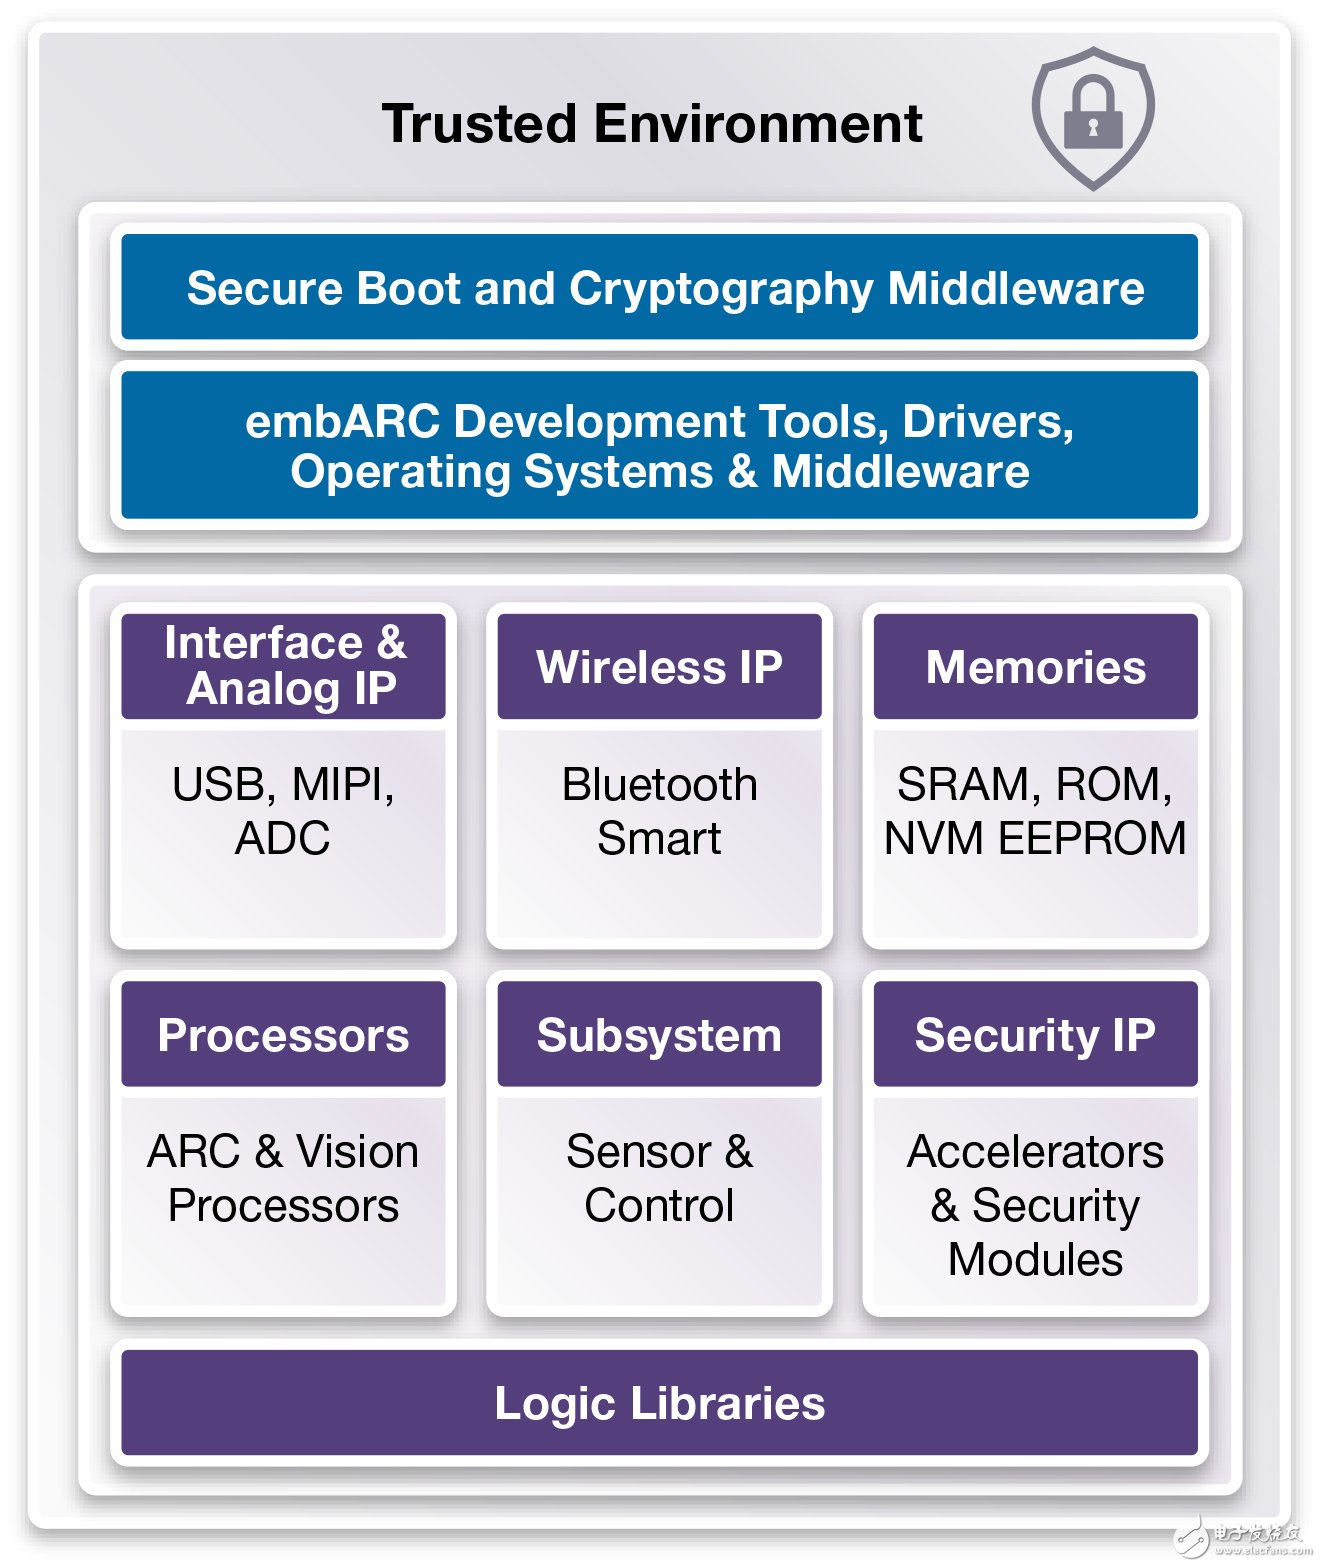 Synopsys offers the industry's most complete portfolio of IP products to accelerate the development of IoT designs